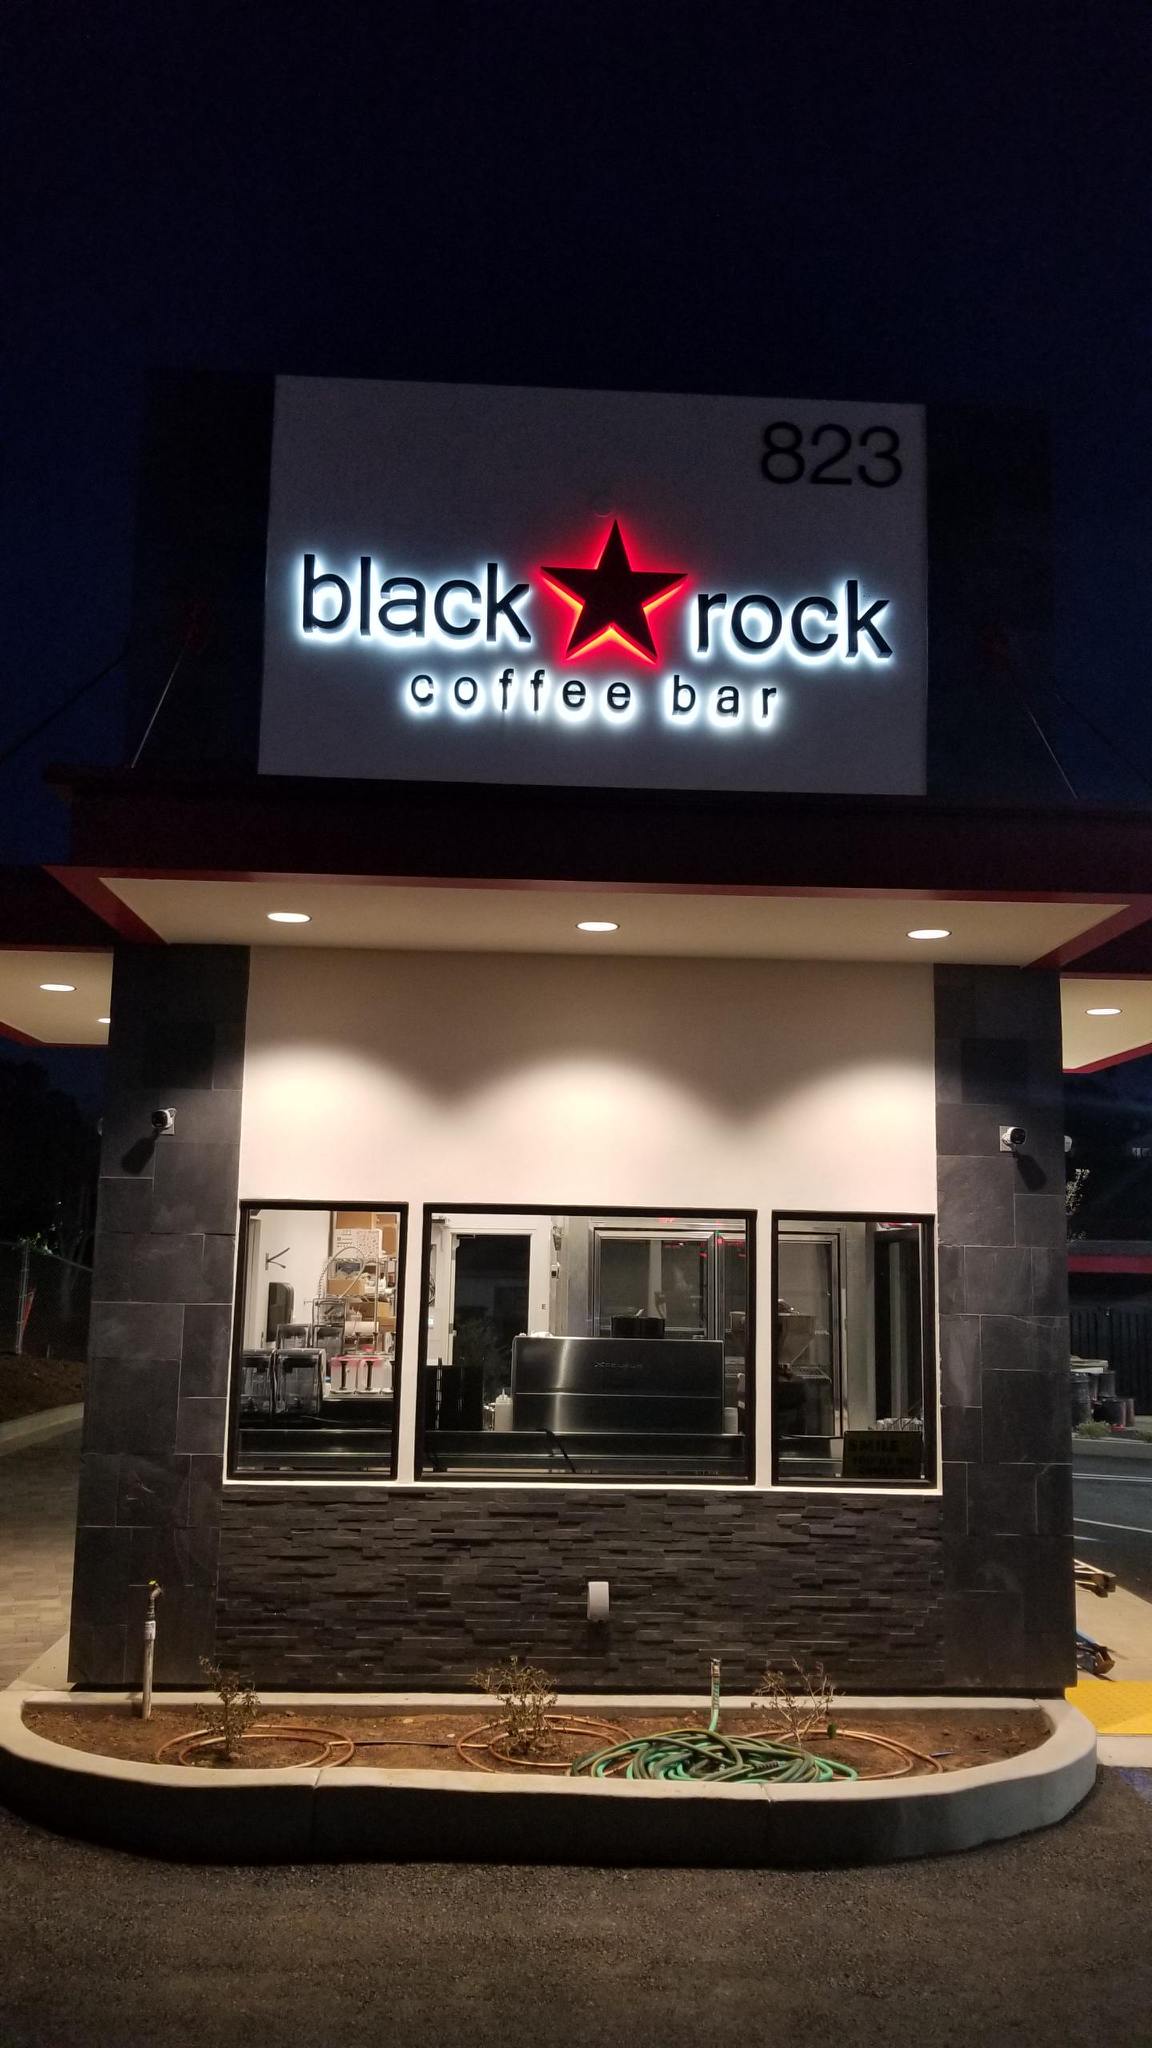 Illuminated sign for Black Rock Coffee